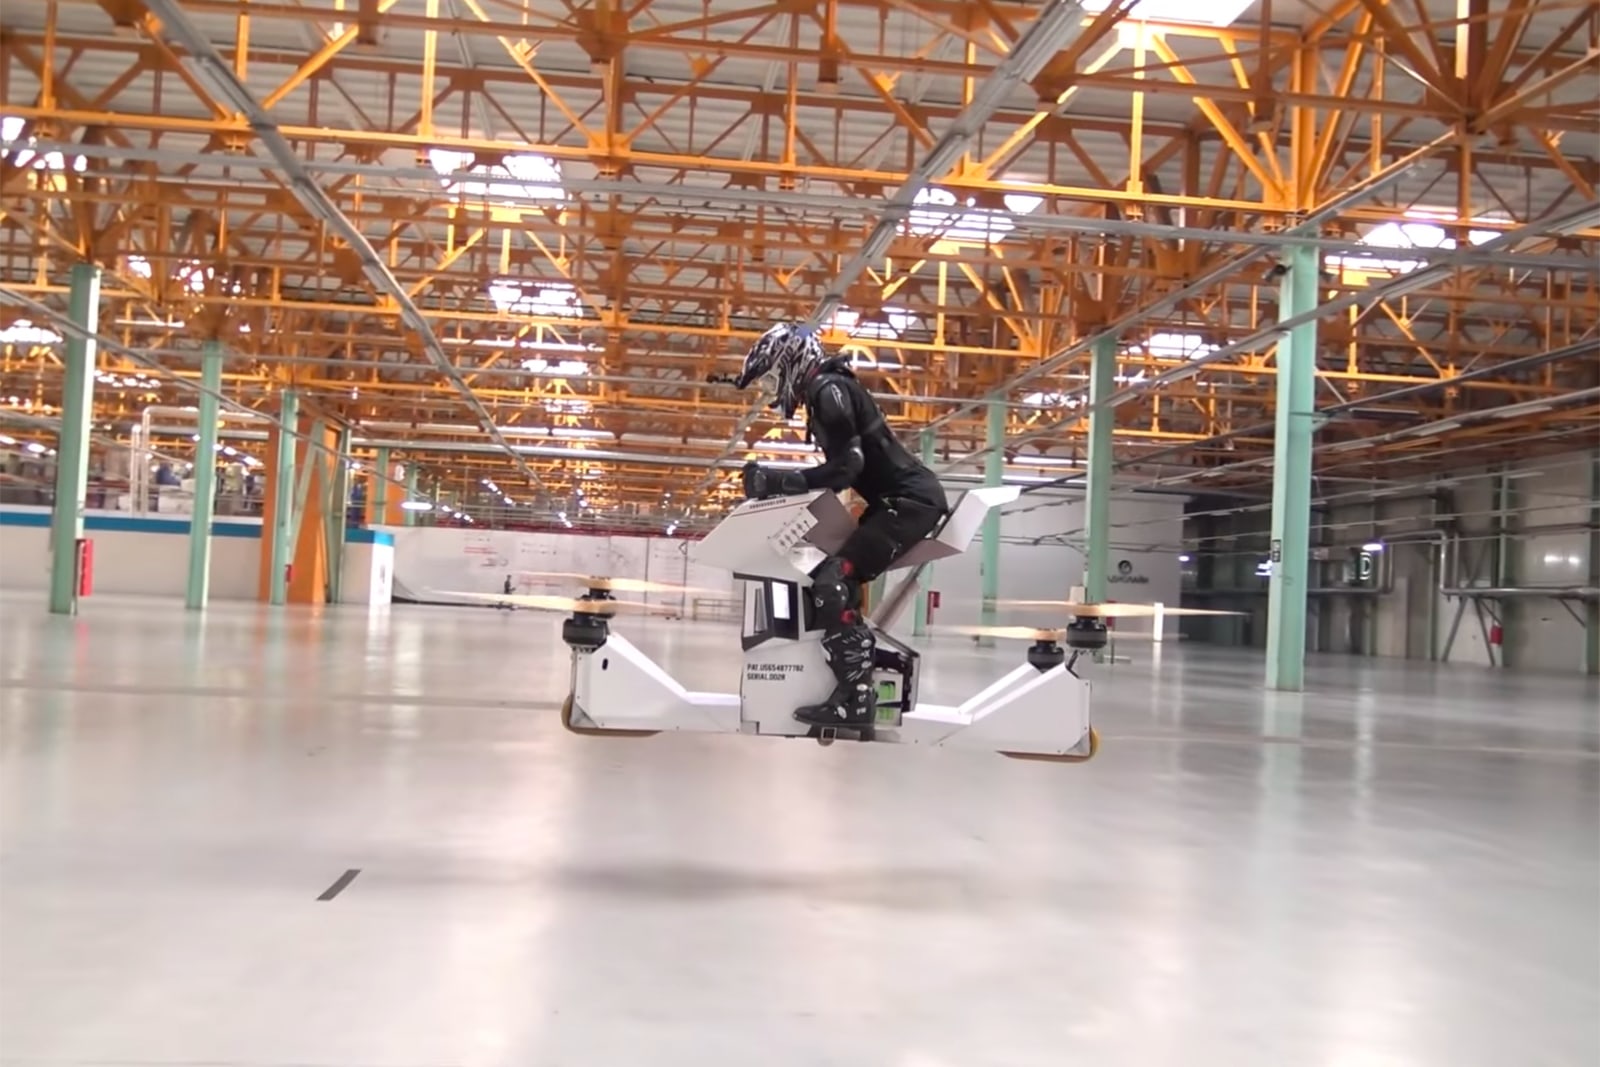 d2d34a94497e5e28%2F204962984%2Fhoversurf-hoverbike.jpg